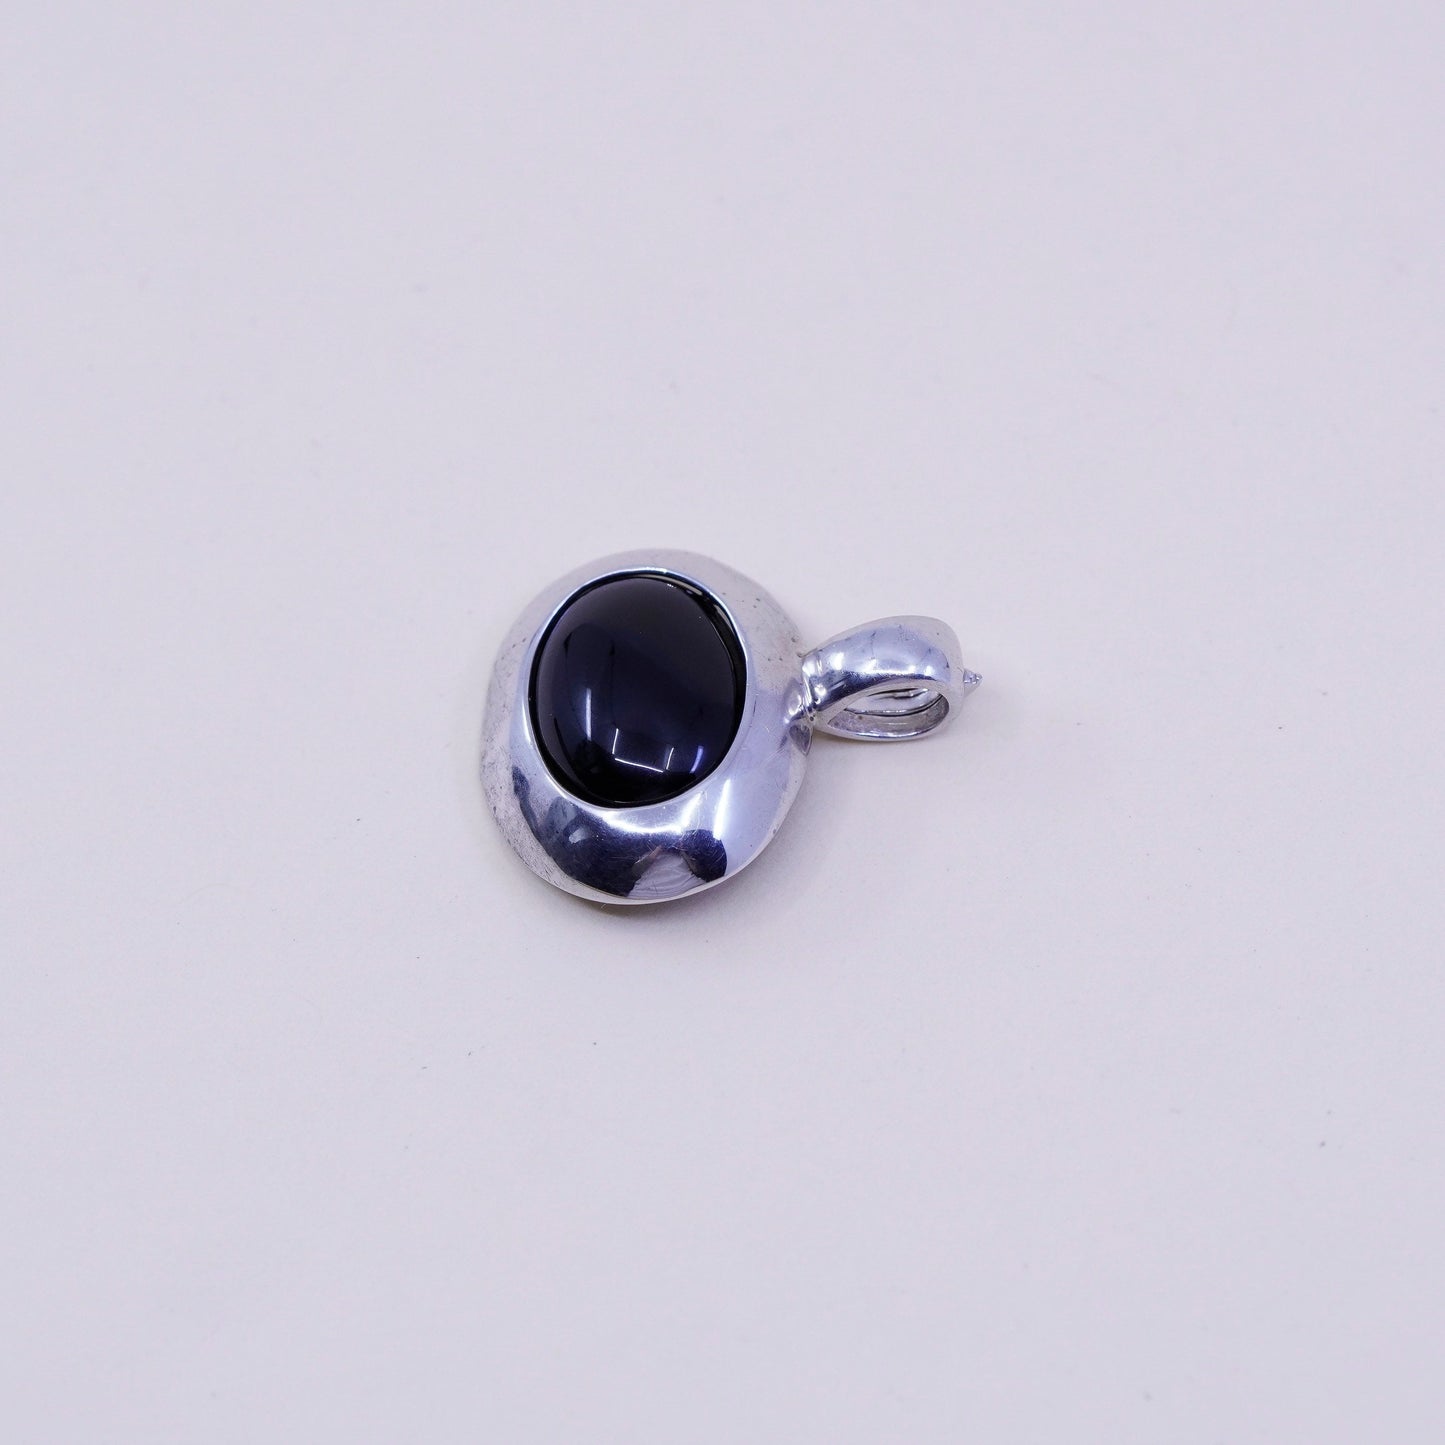 interchangeable handmade sterling silver pendant, 925 cage with oval black onyx